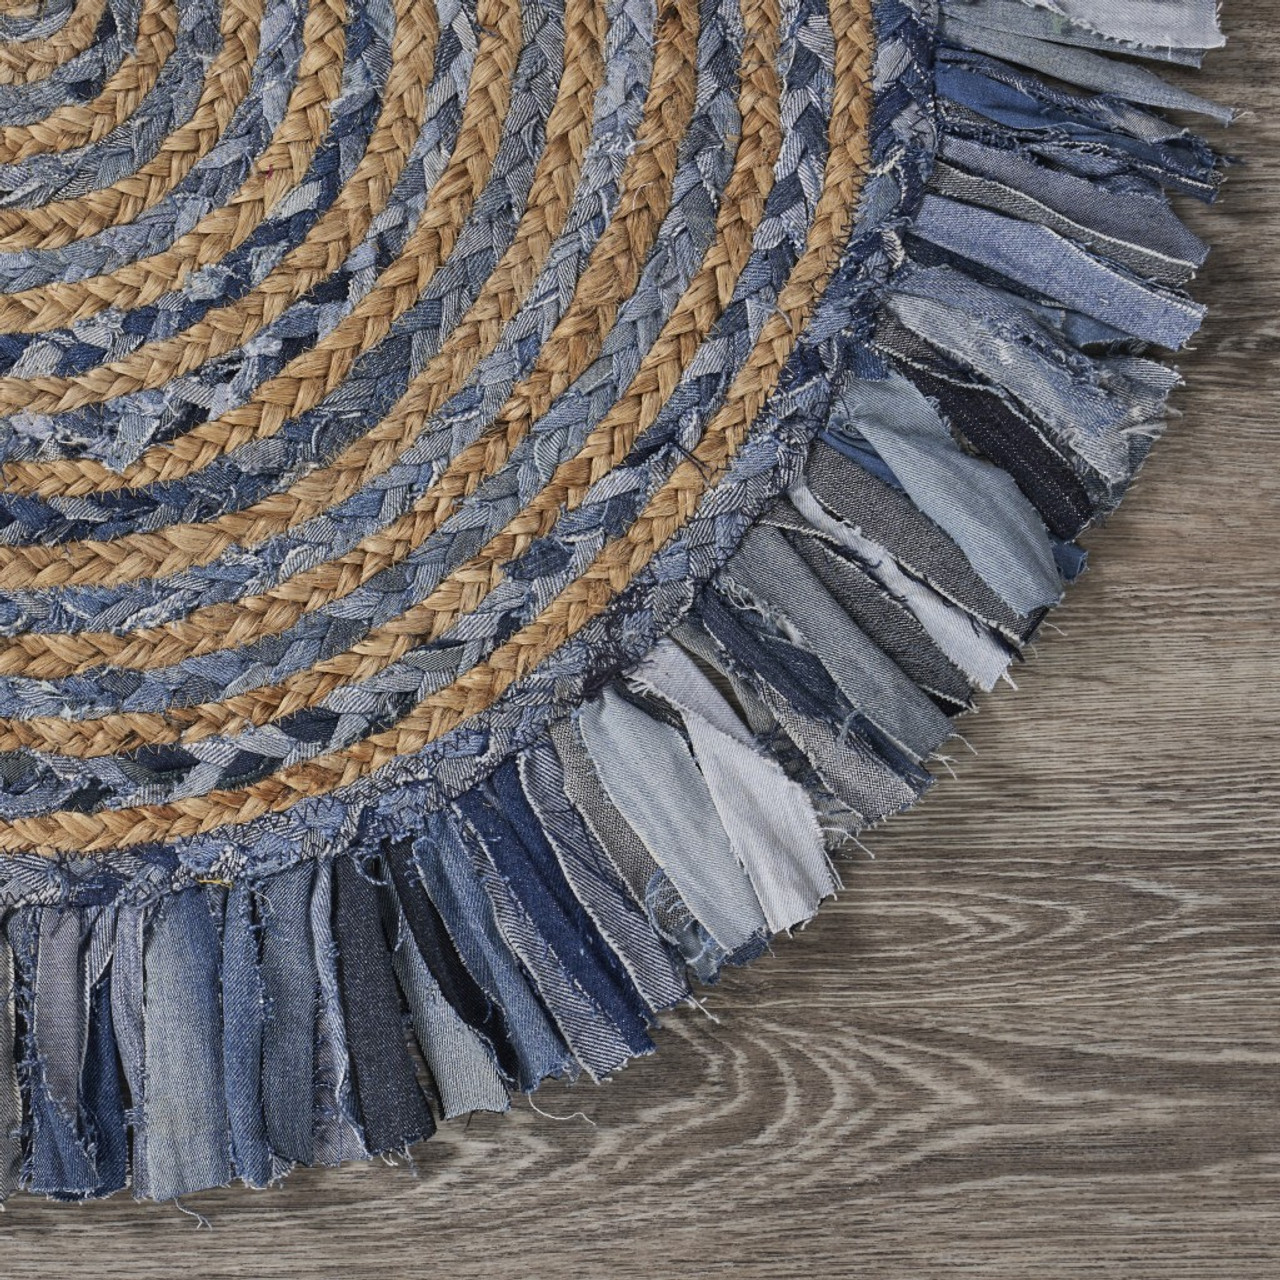 Indian Casual Handmade Braided Blue Color Denim and Jute Area Rugs